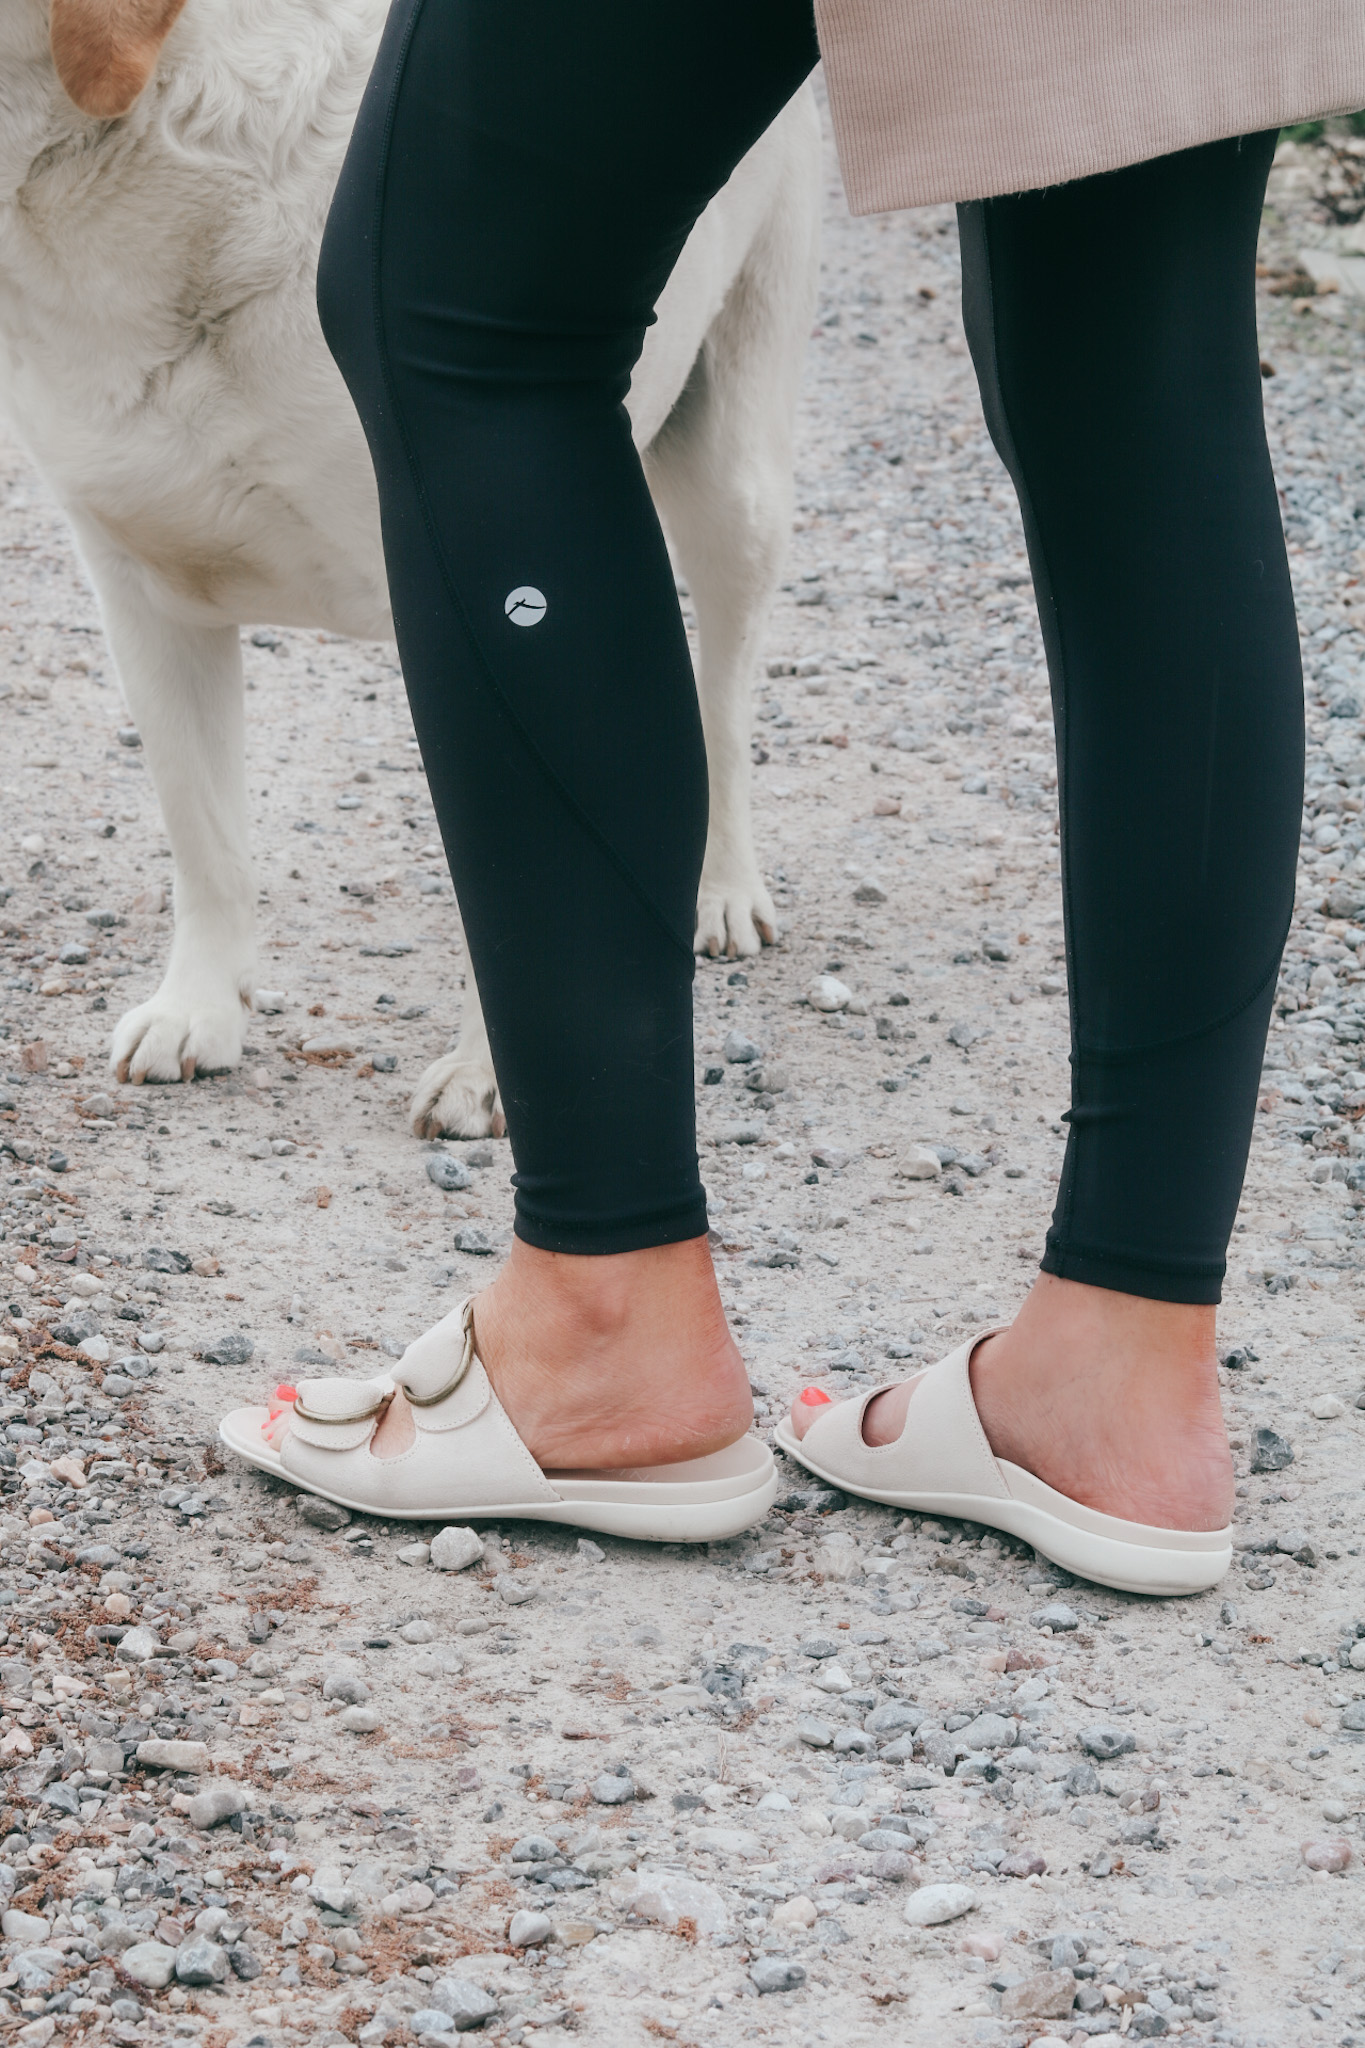 spring sandals with good arch support